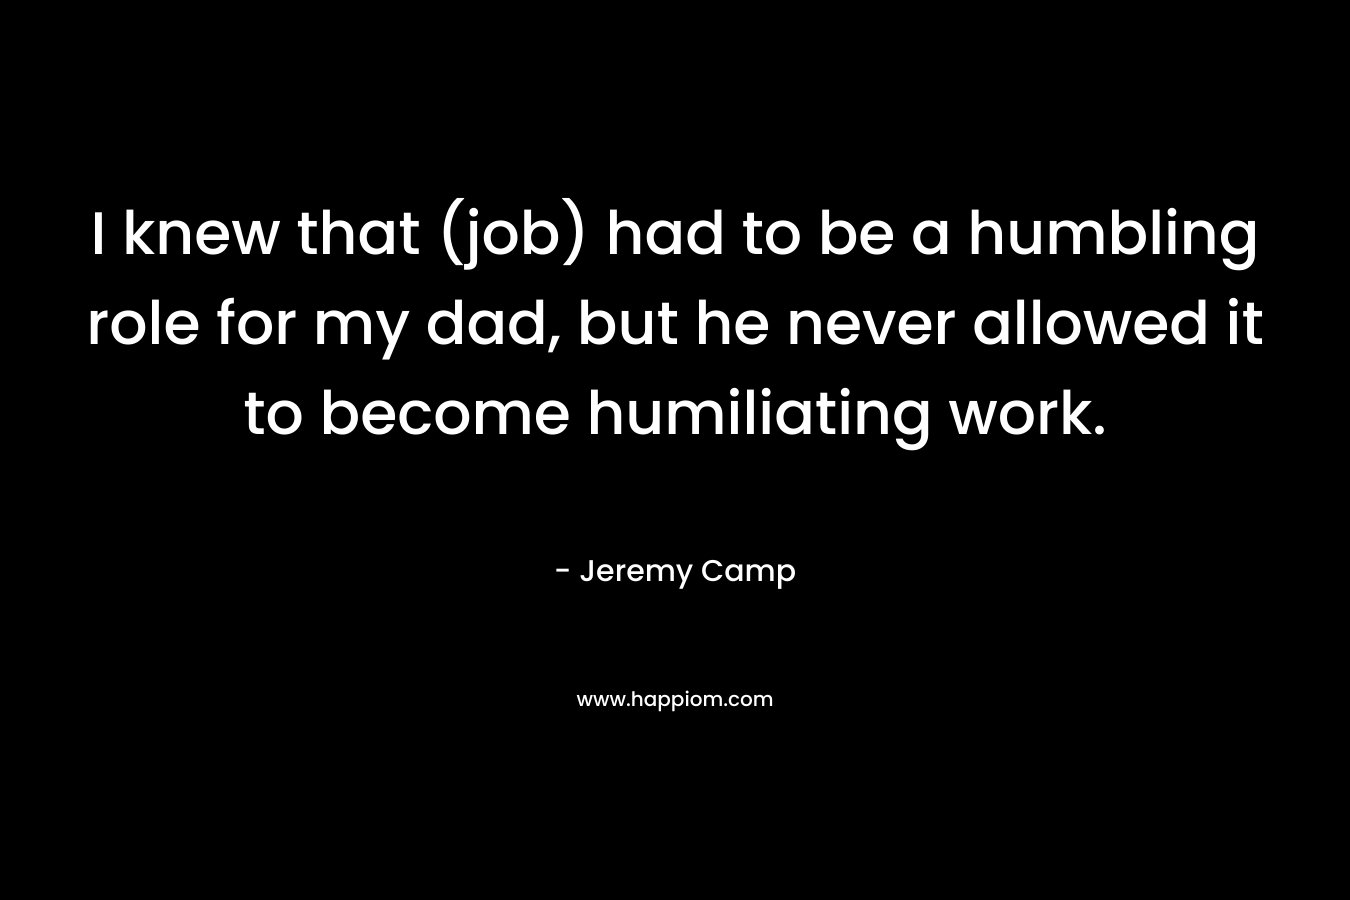 I knew that (job) had to be a humbling role for my dad, but he never allowed it to become humiliating work. – Jeremy Camp